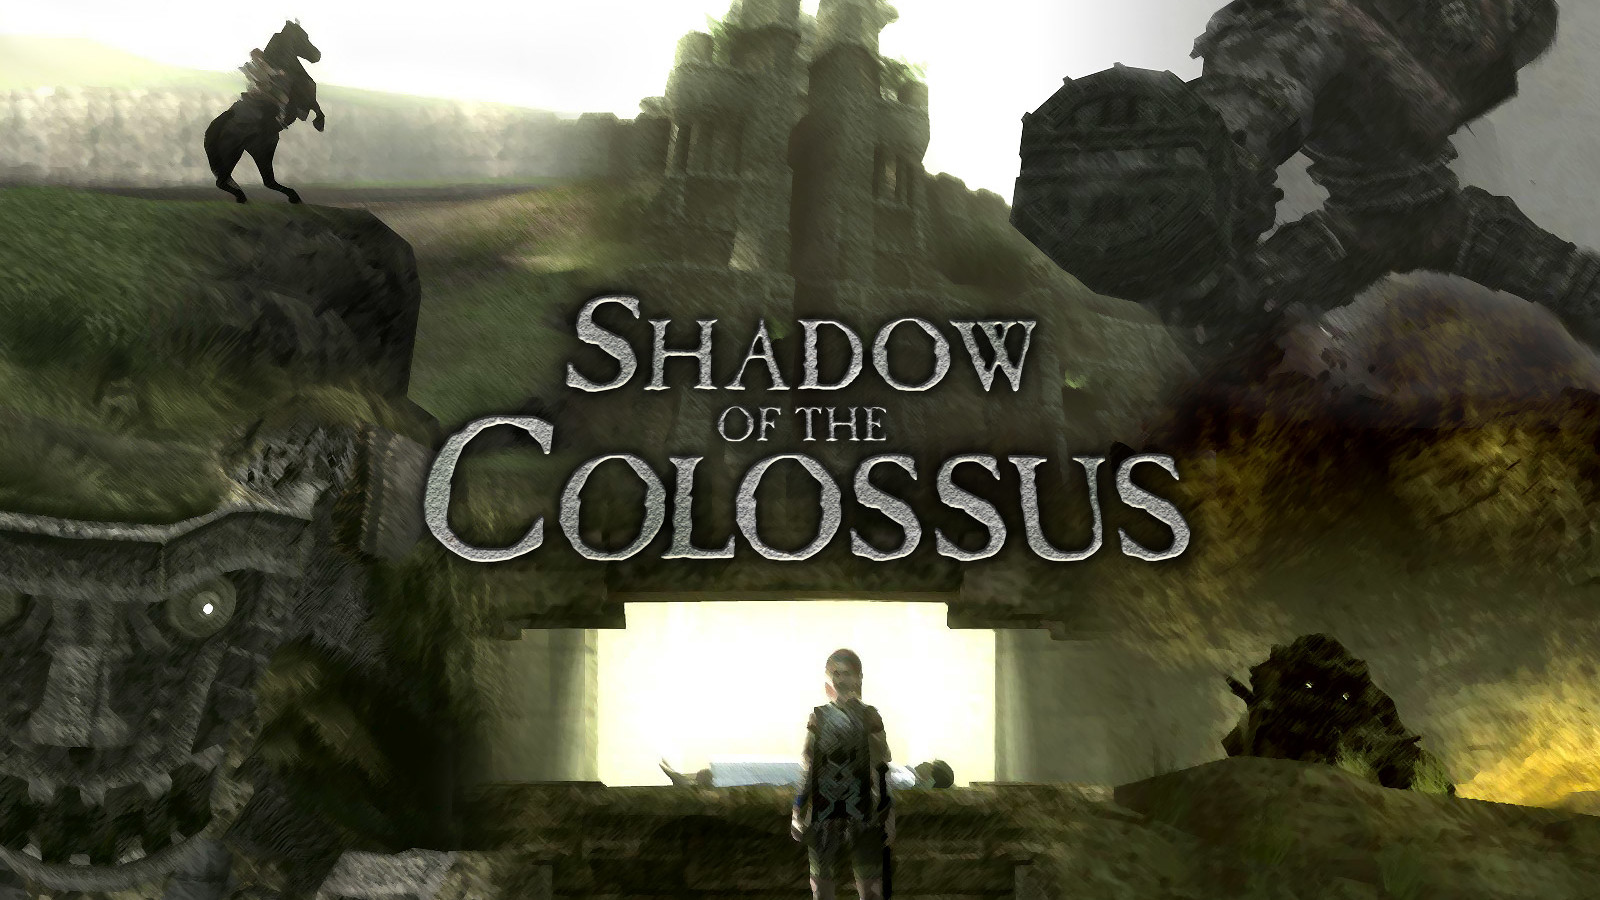 Andres Muschietti regisseert gameverfilming 'Shadow of the Colossus'